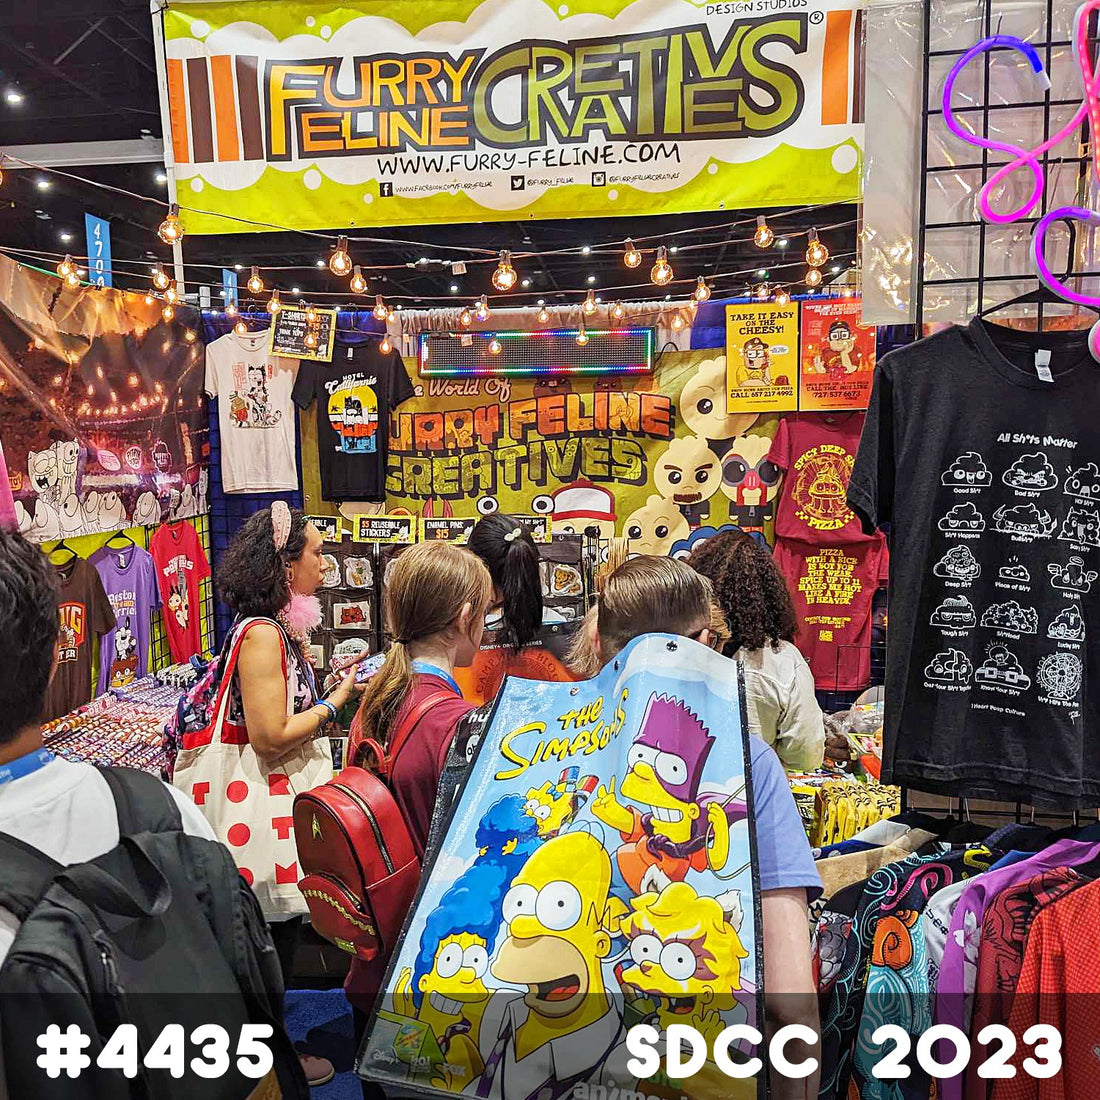 Year 10 (2023) at SDCC - Turn It Up to Eleven